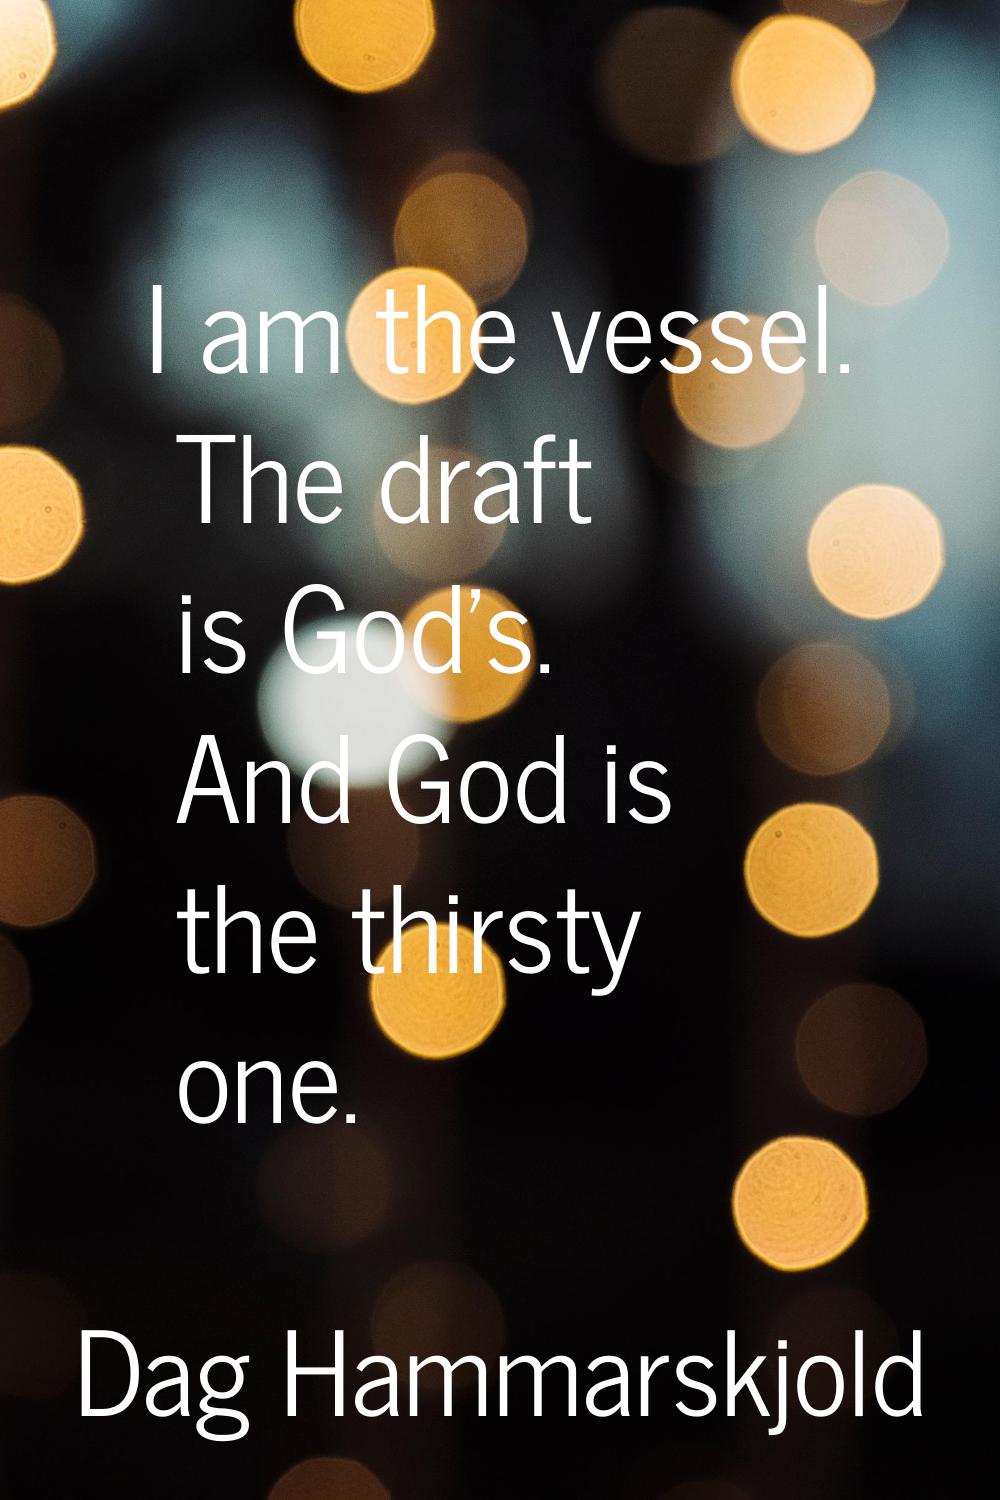 I am the vessel. The draft is God's. And God is the thirsty one.